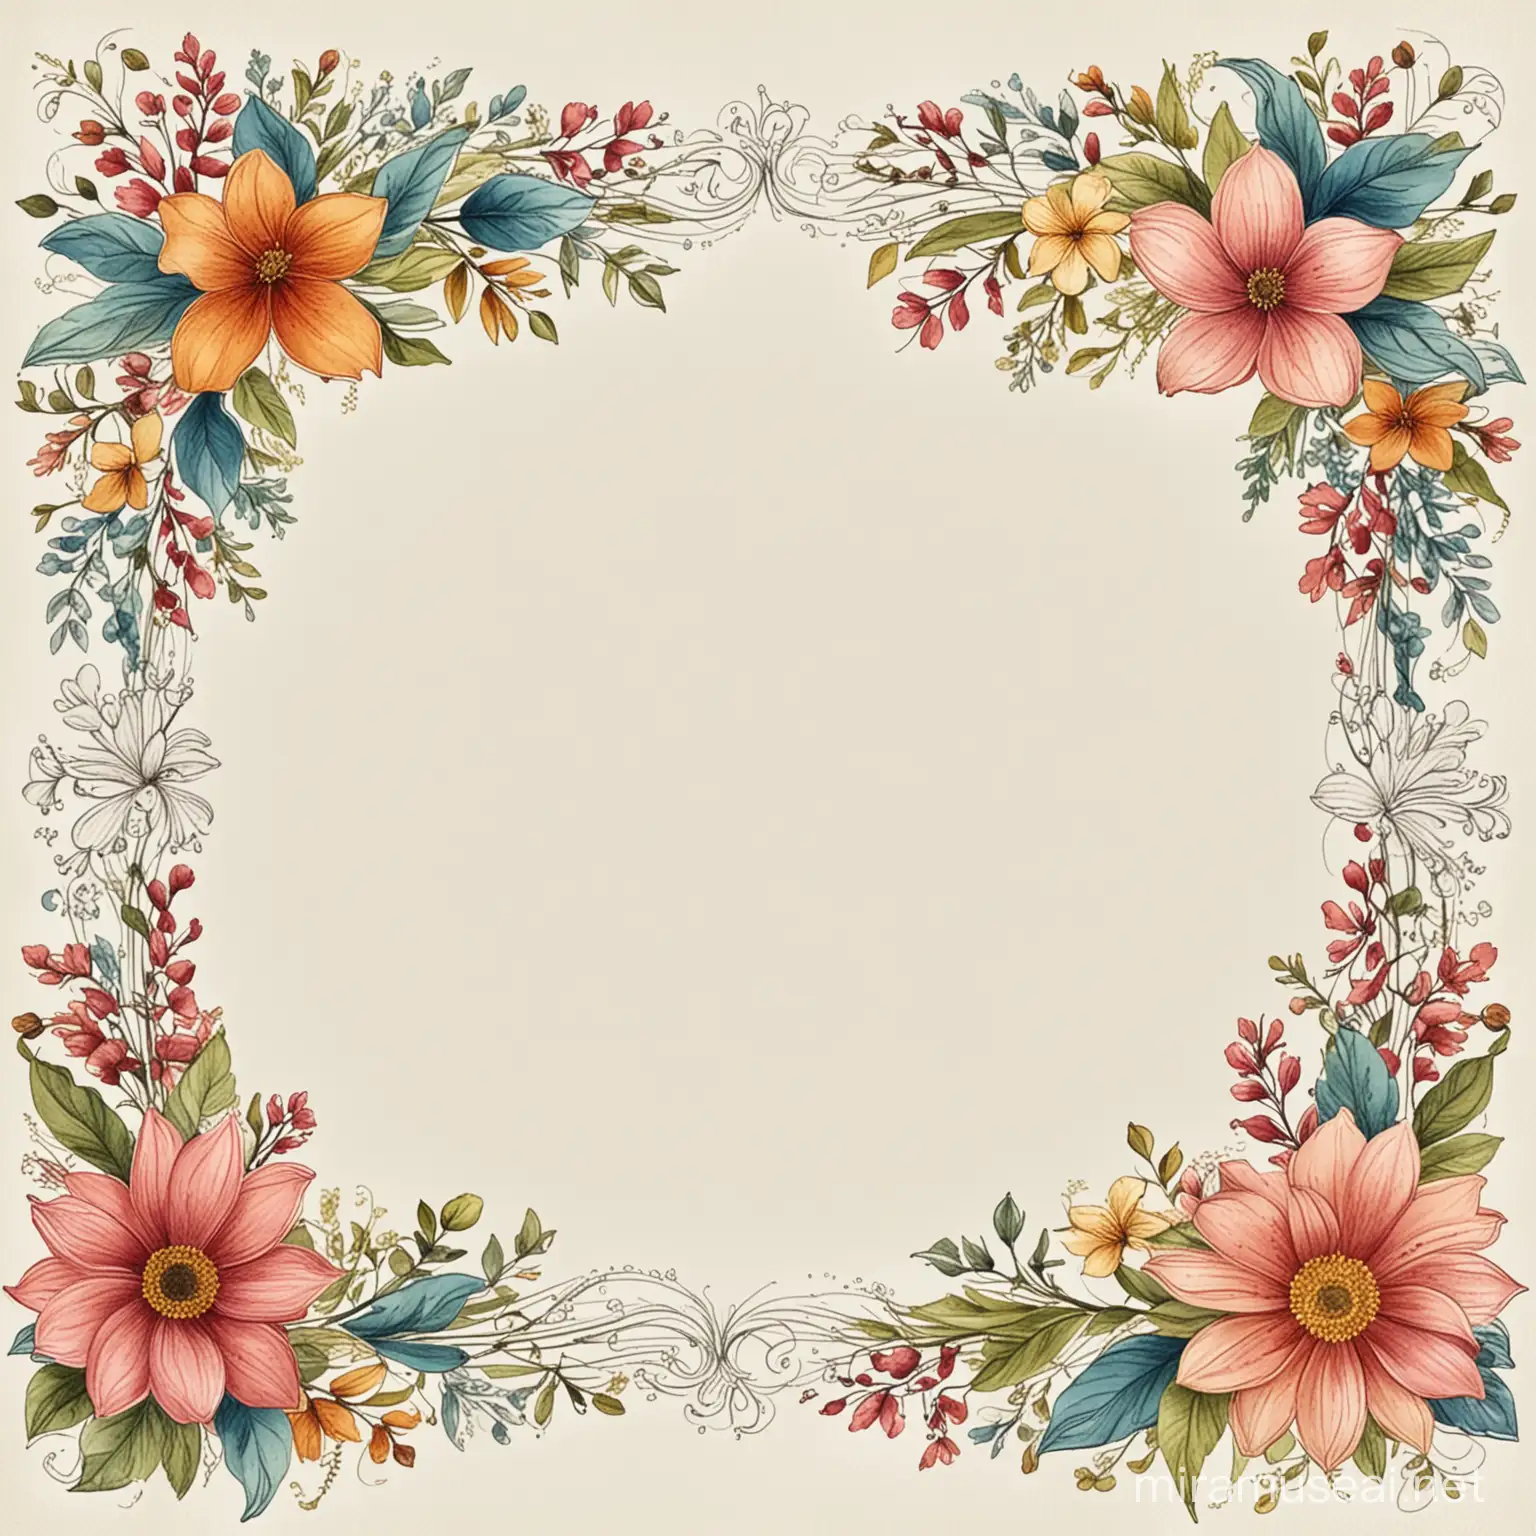 Generate a blank white page with floral design along the borders.